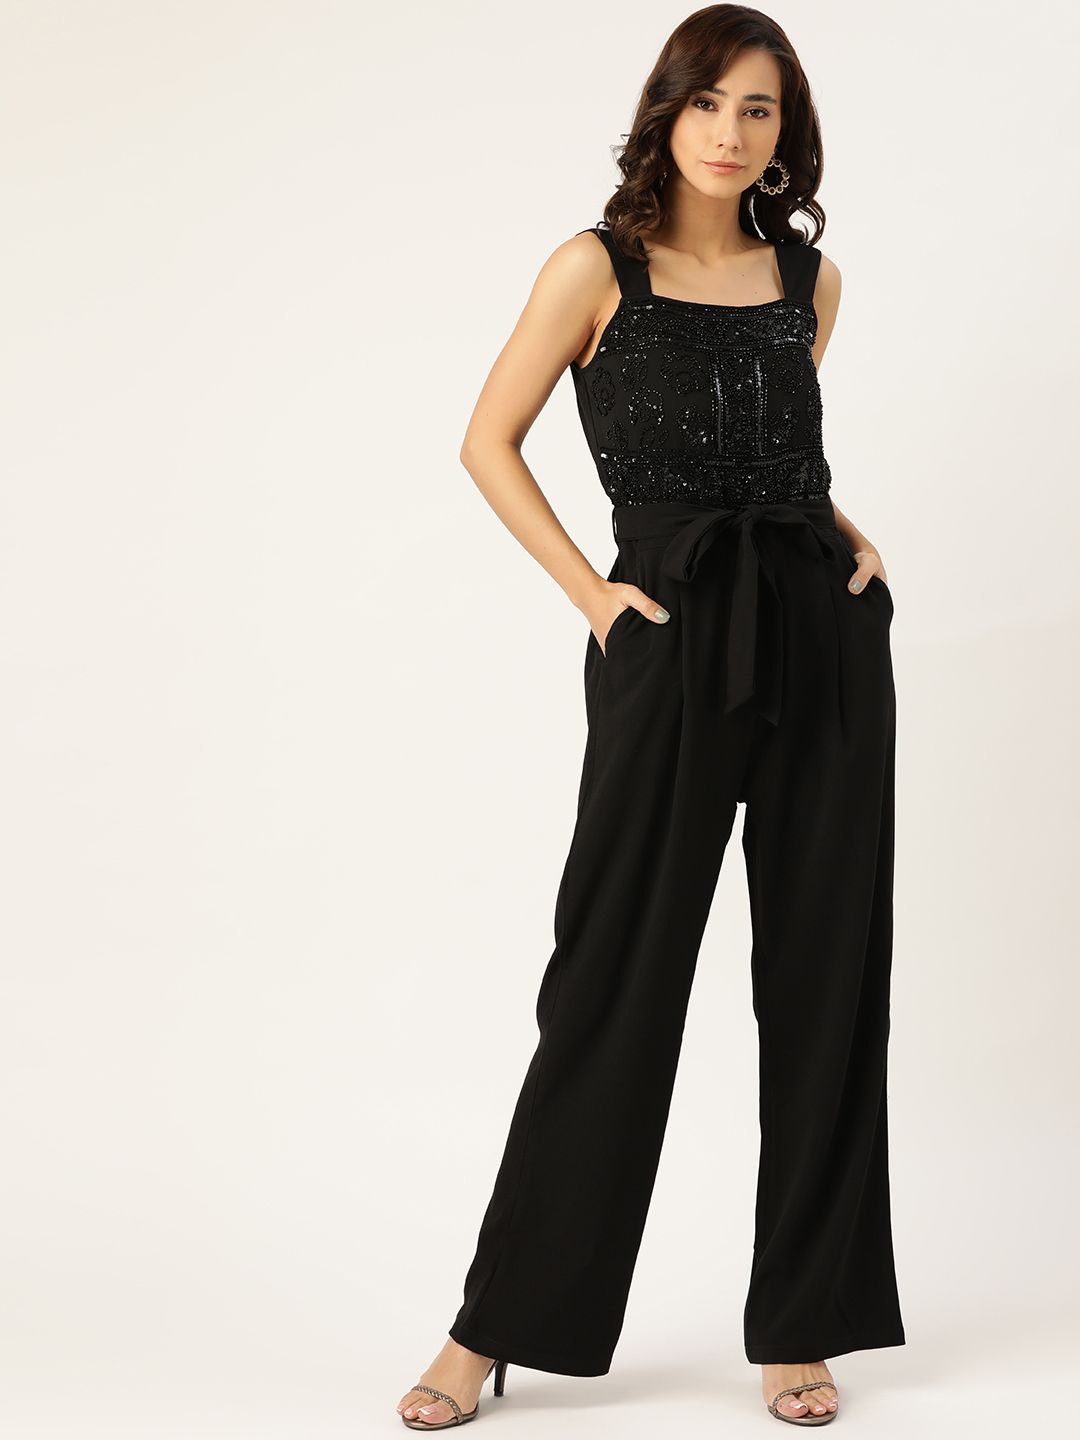 Antheaa Black Embellished Basic Jumpsuit with Belt Price in India